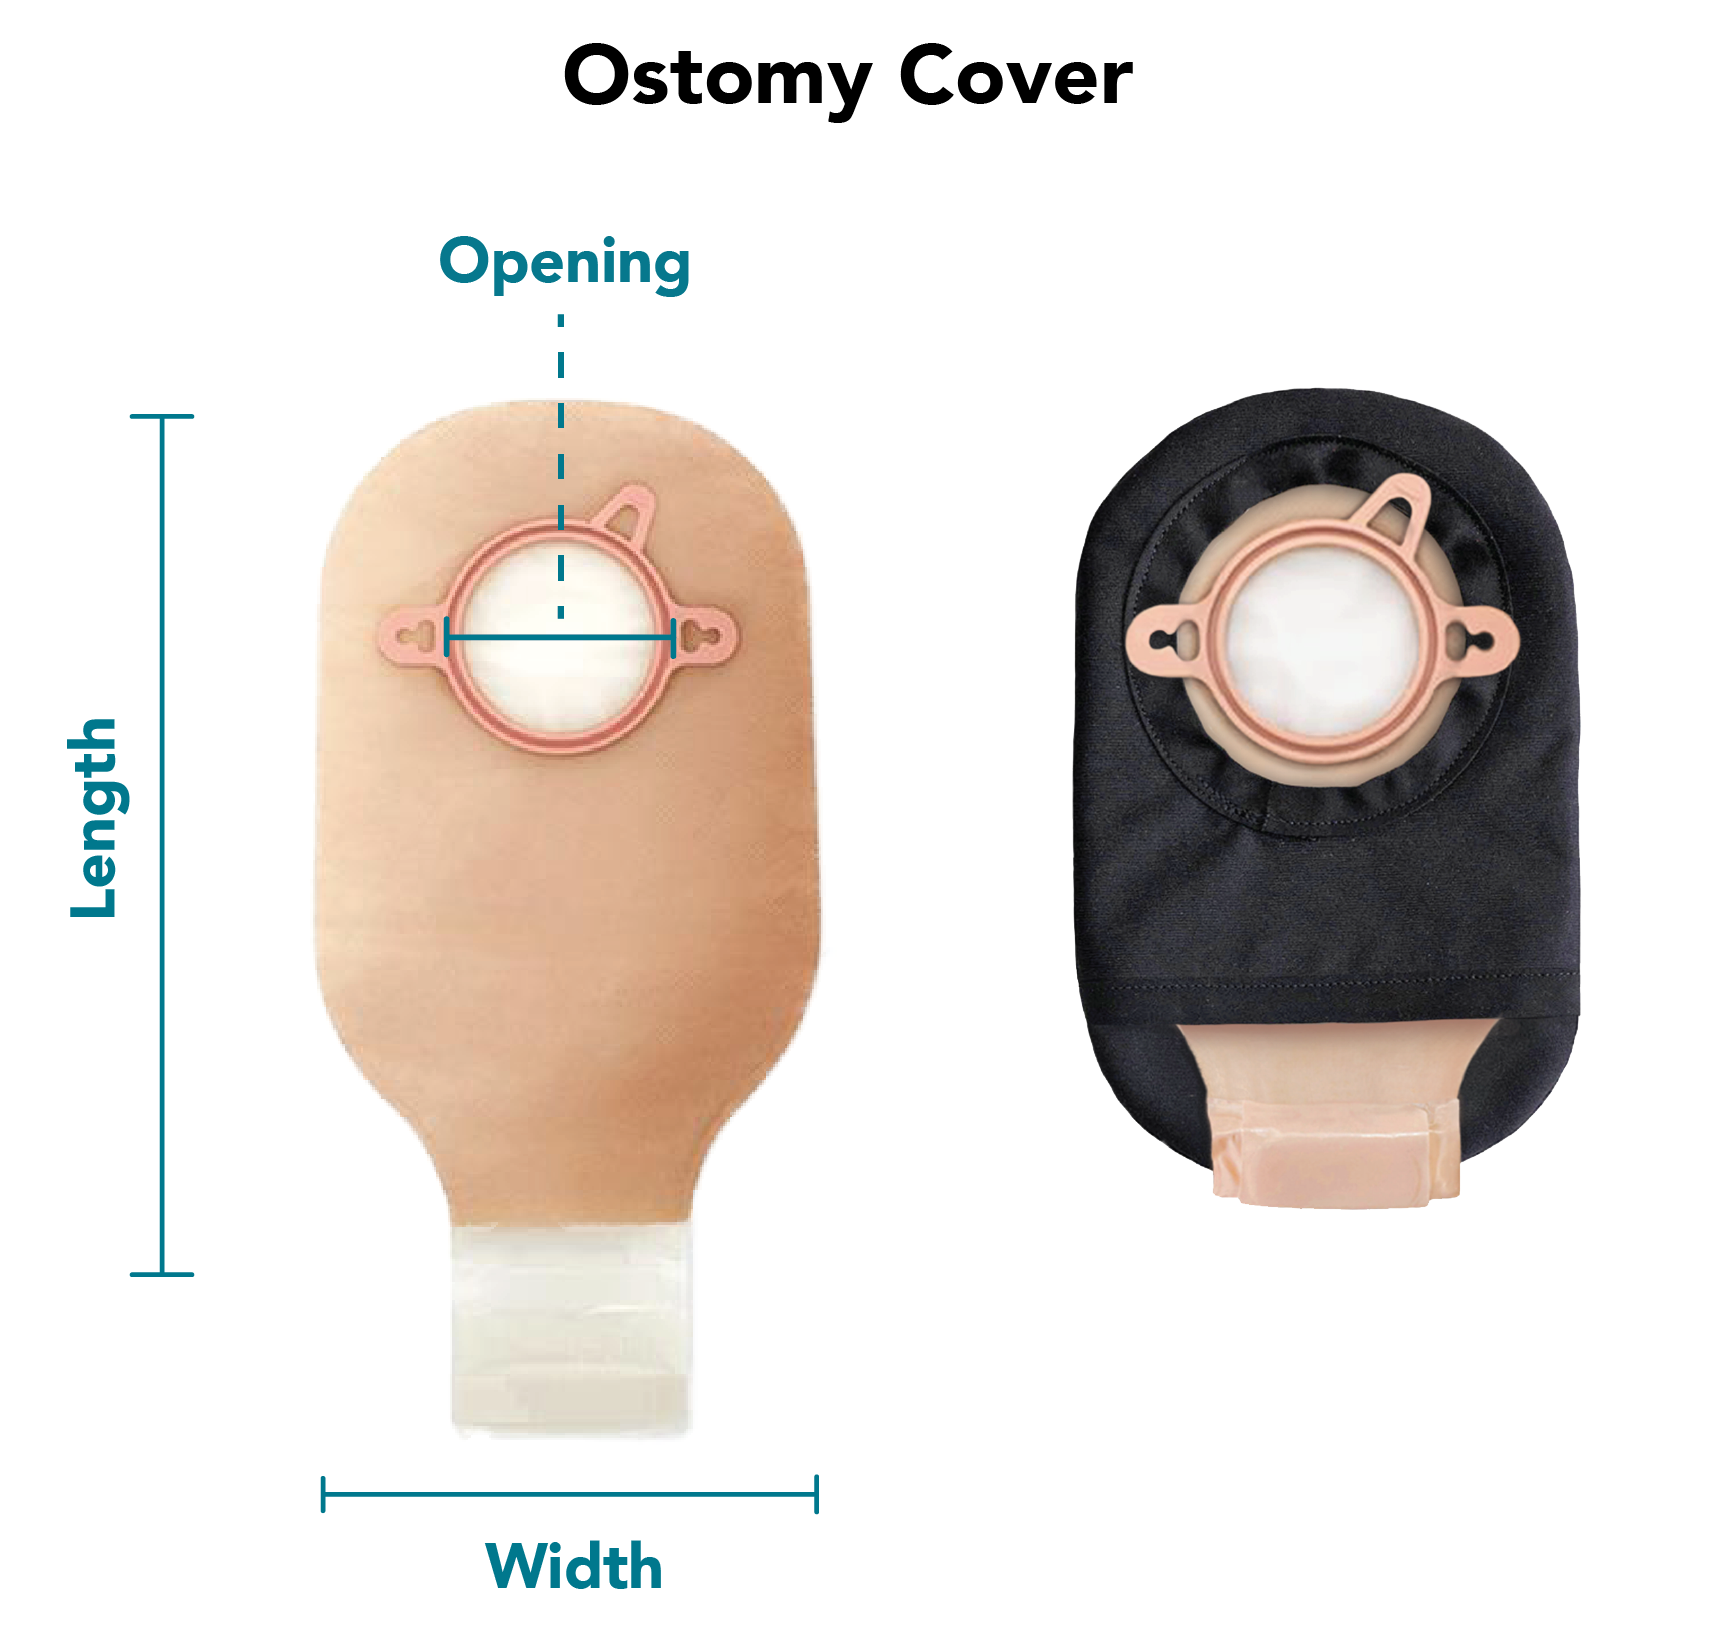 Size chart for Ostomy cover showing how to measure length, width and opening diameter